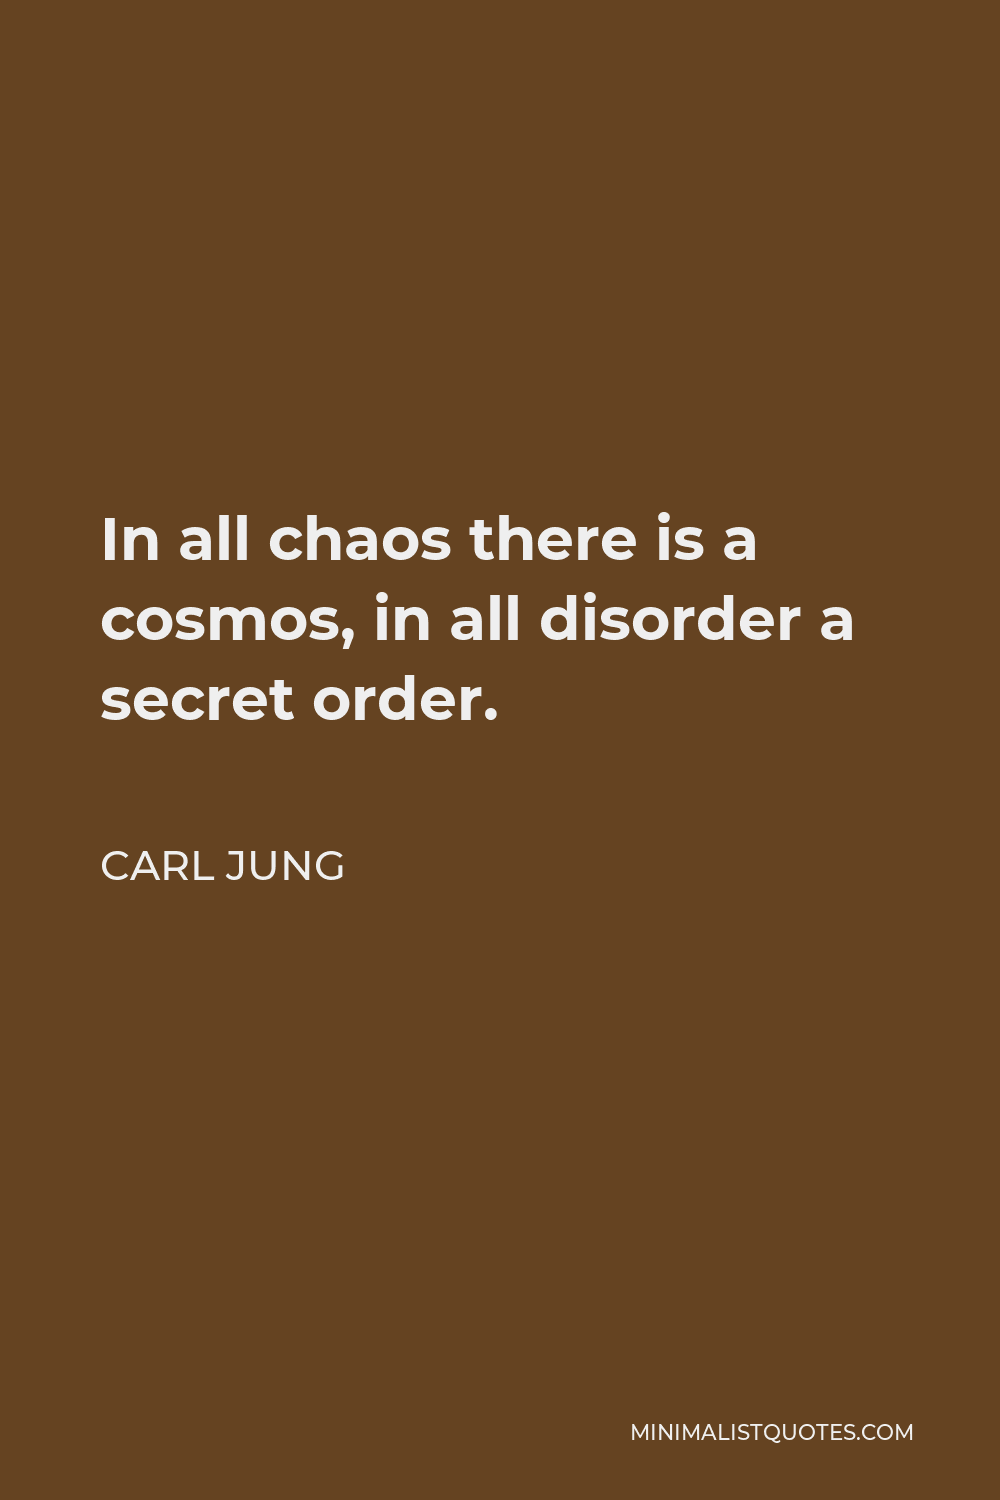 Carl Jung Quote - In all chaos there is a cosmos, in all disorder a secret order.